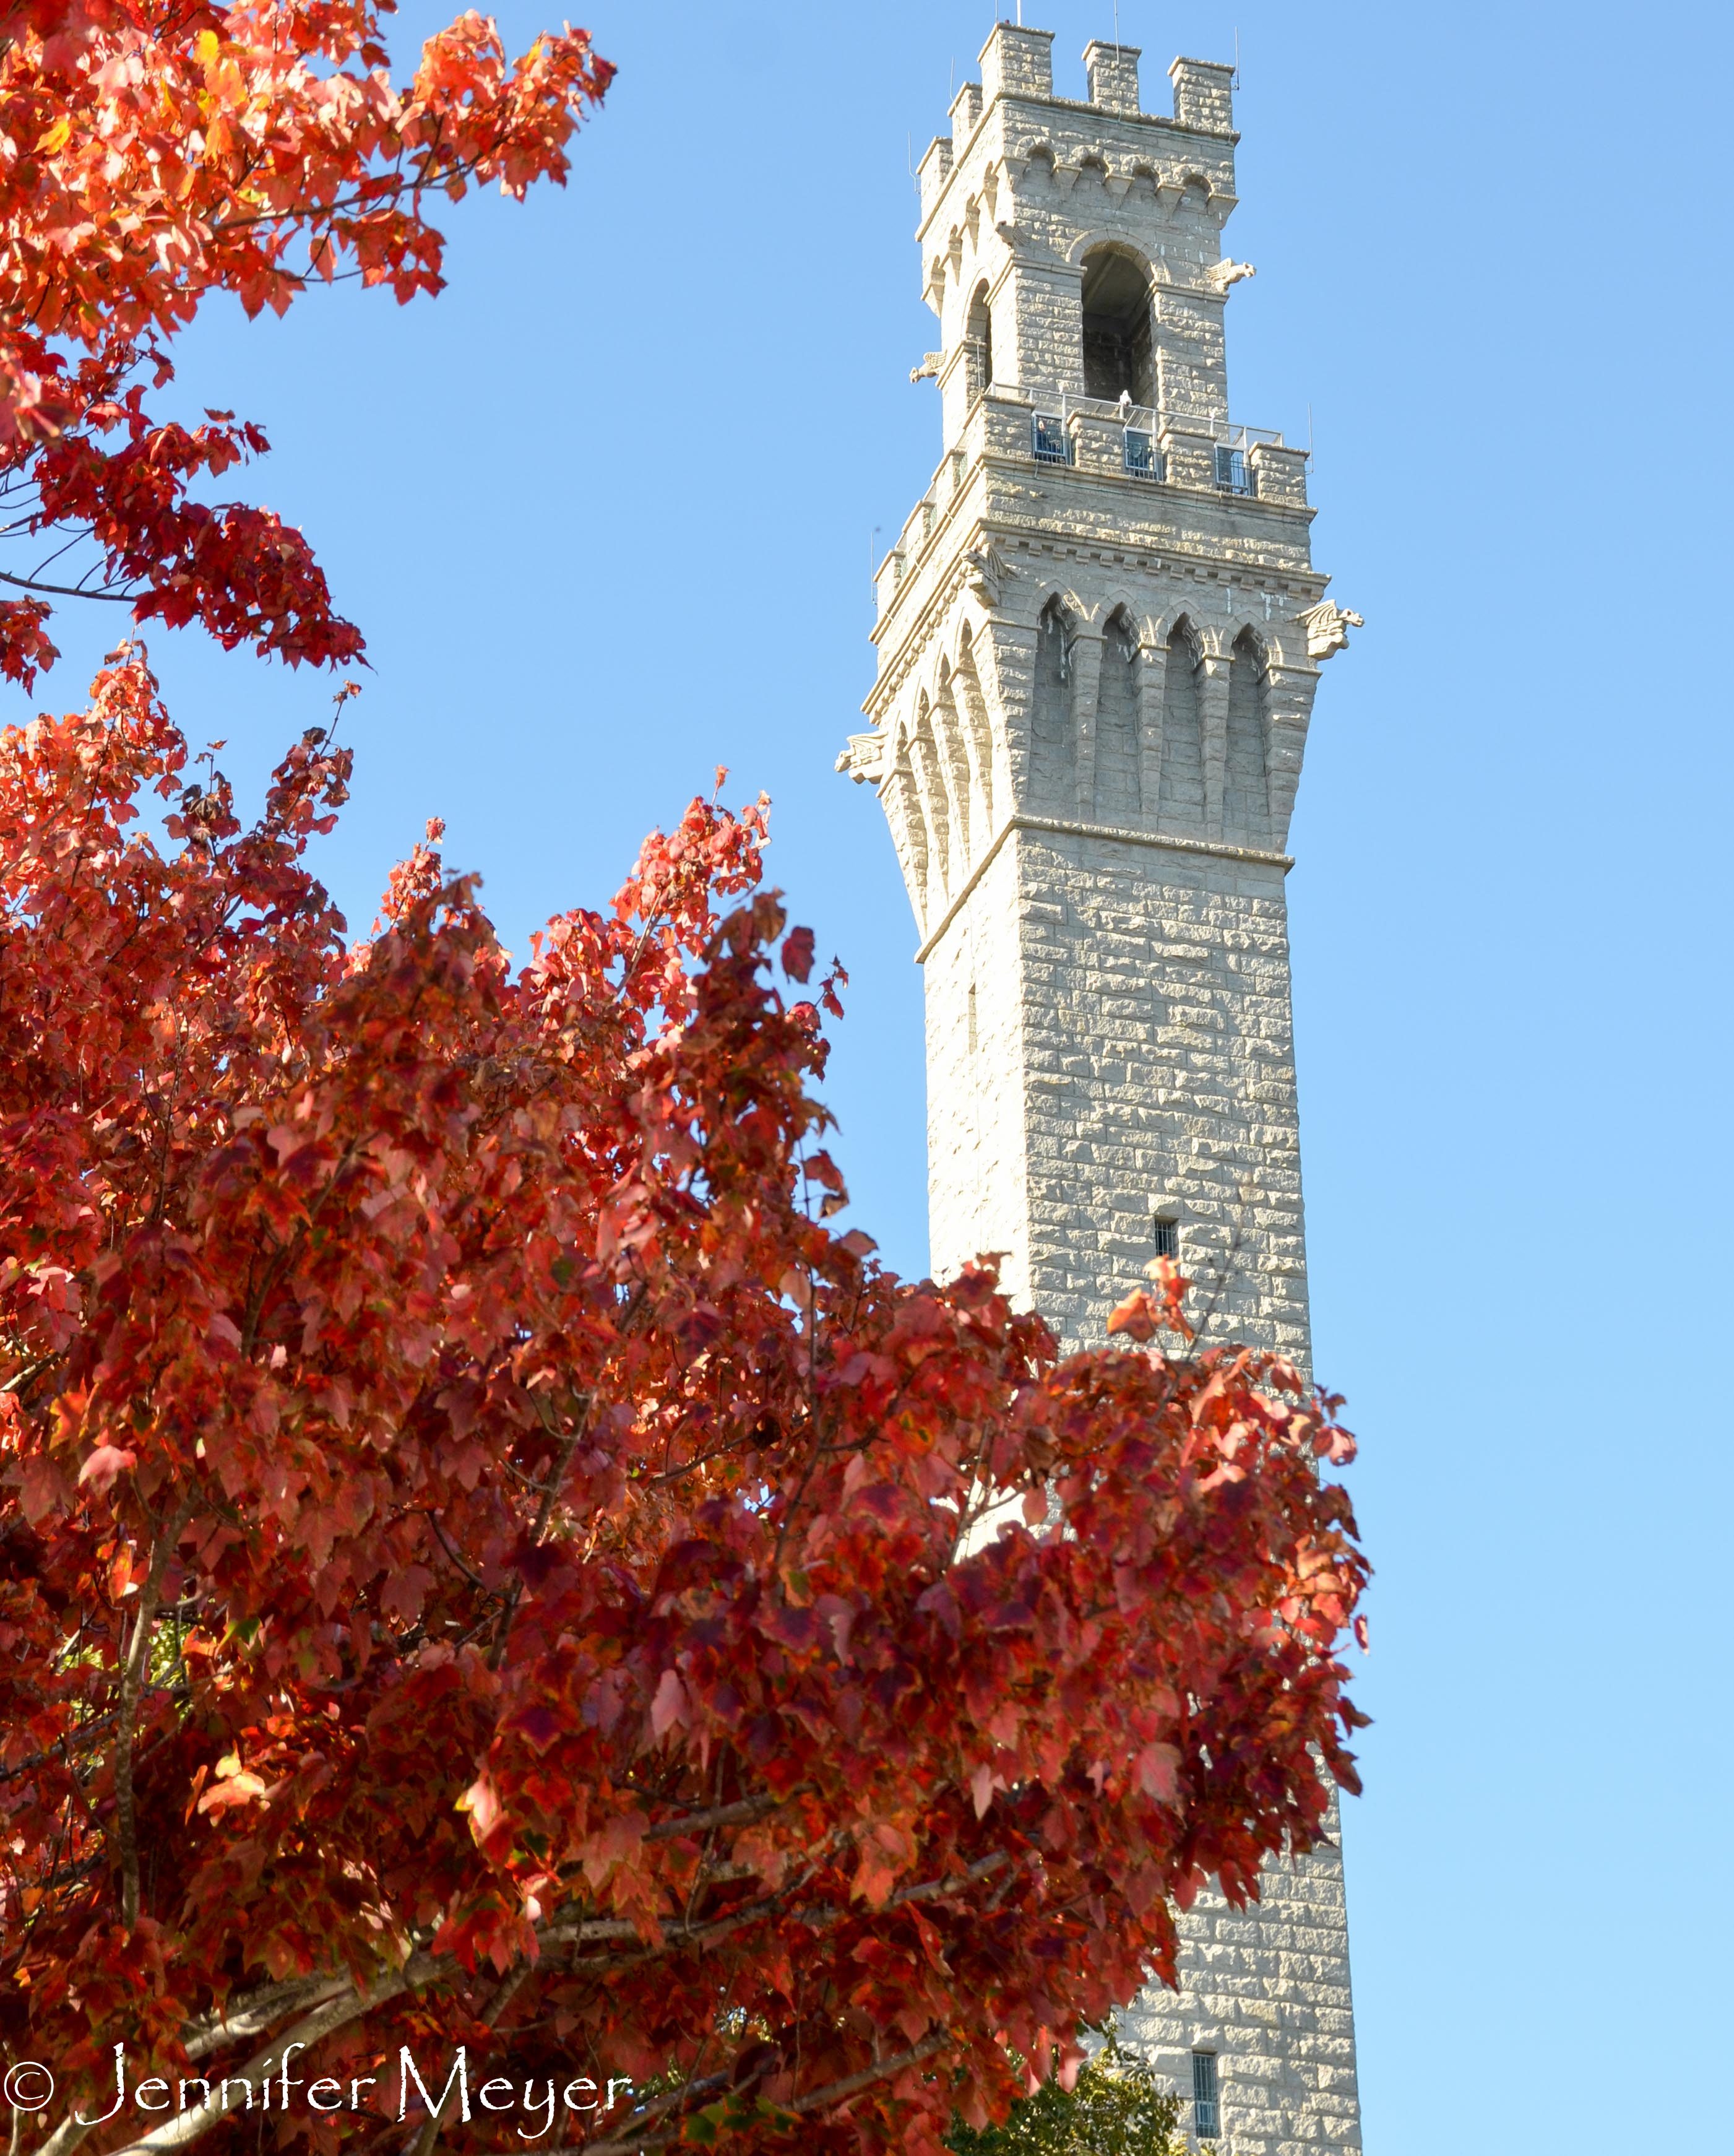 This tower, patterned after one in Sienna, was built in 1910 to commemorate Mayflower pilgrims.